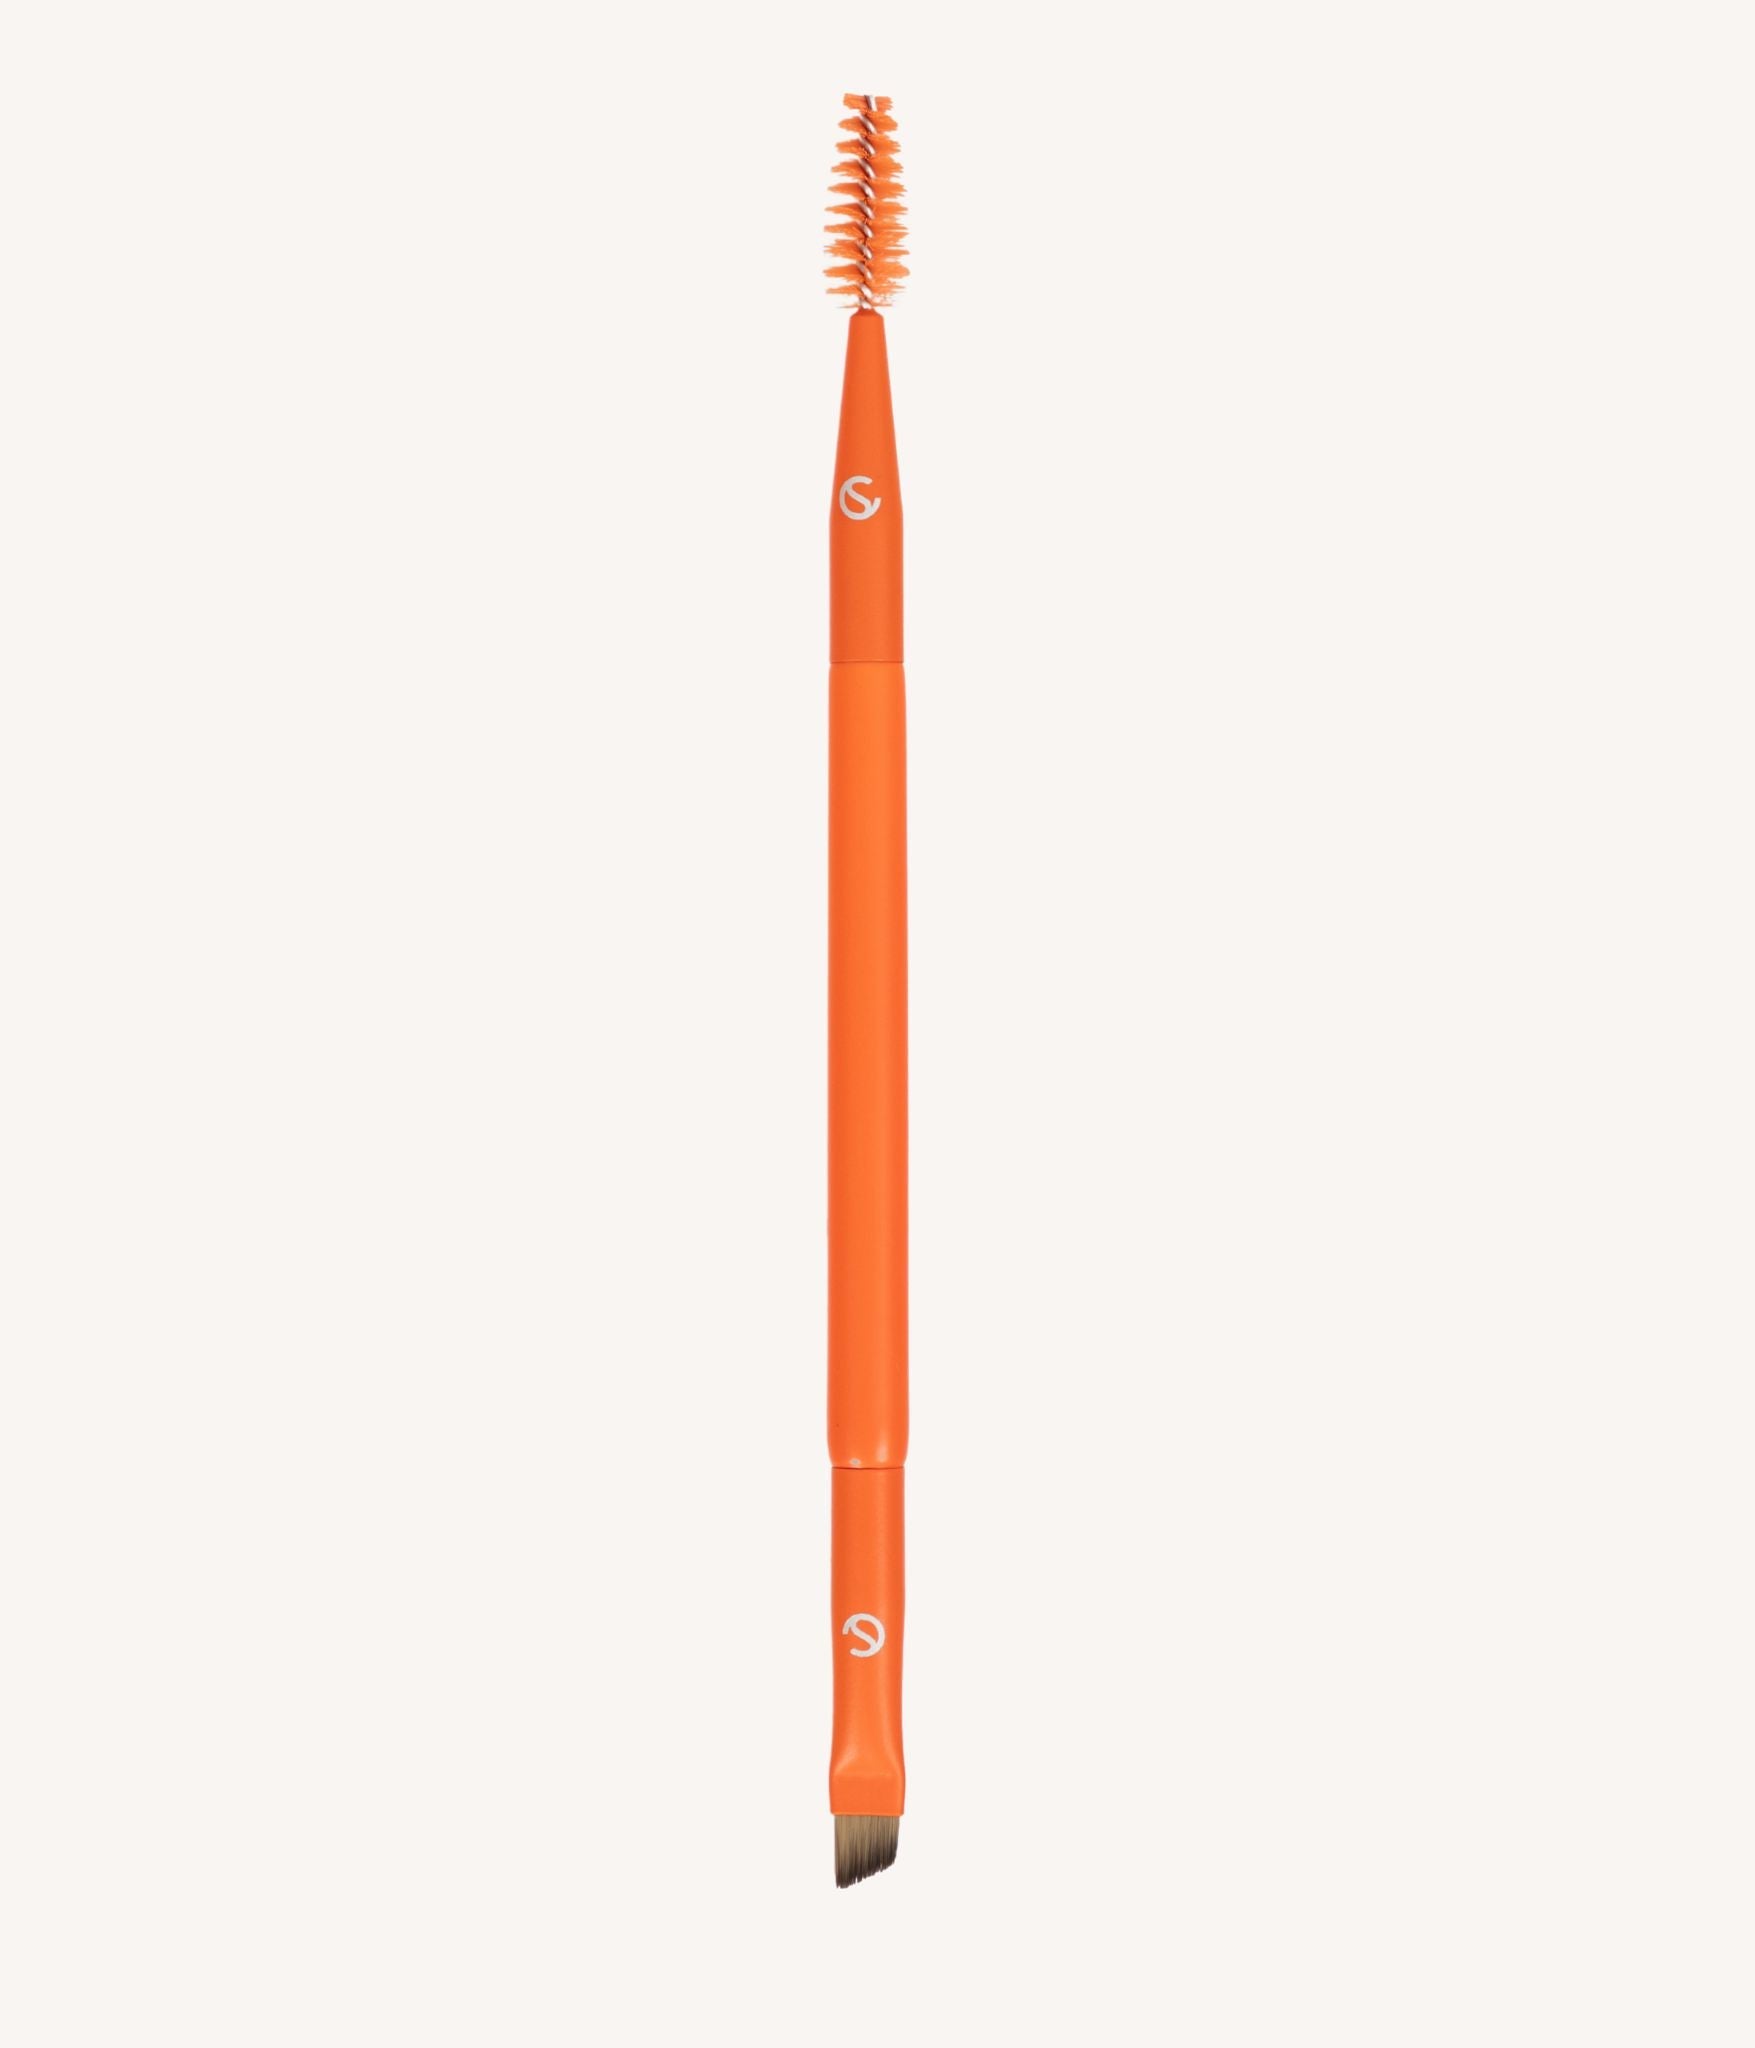 Duo Small Angled & Spoolie brush